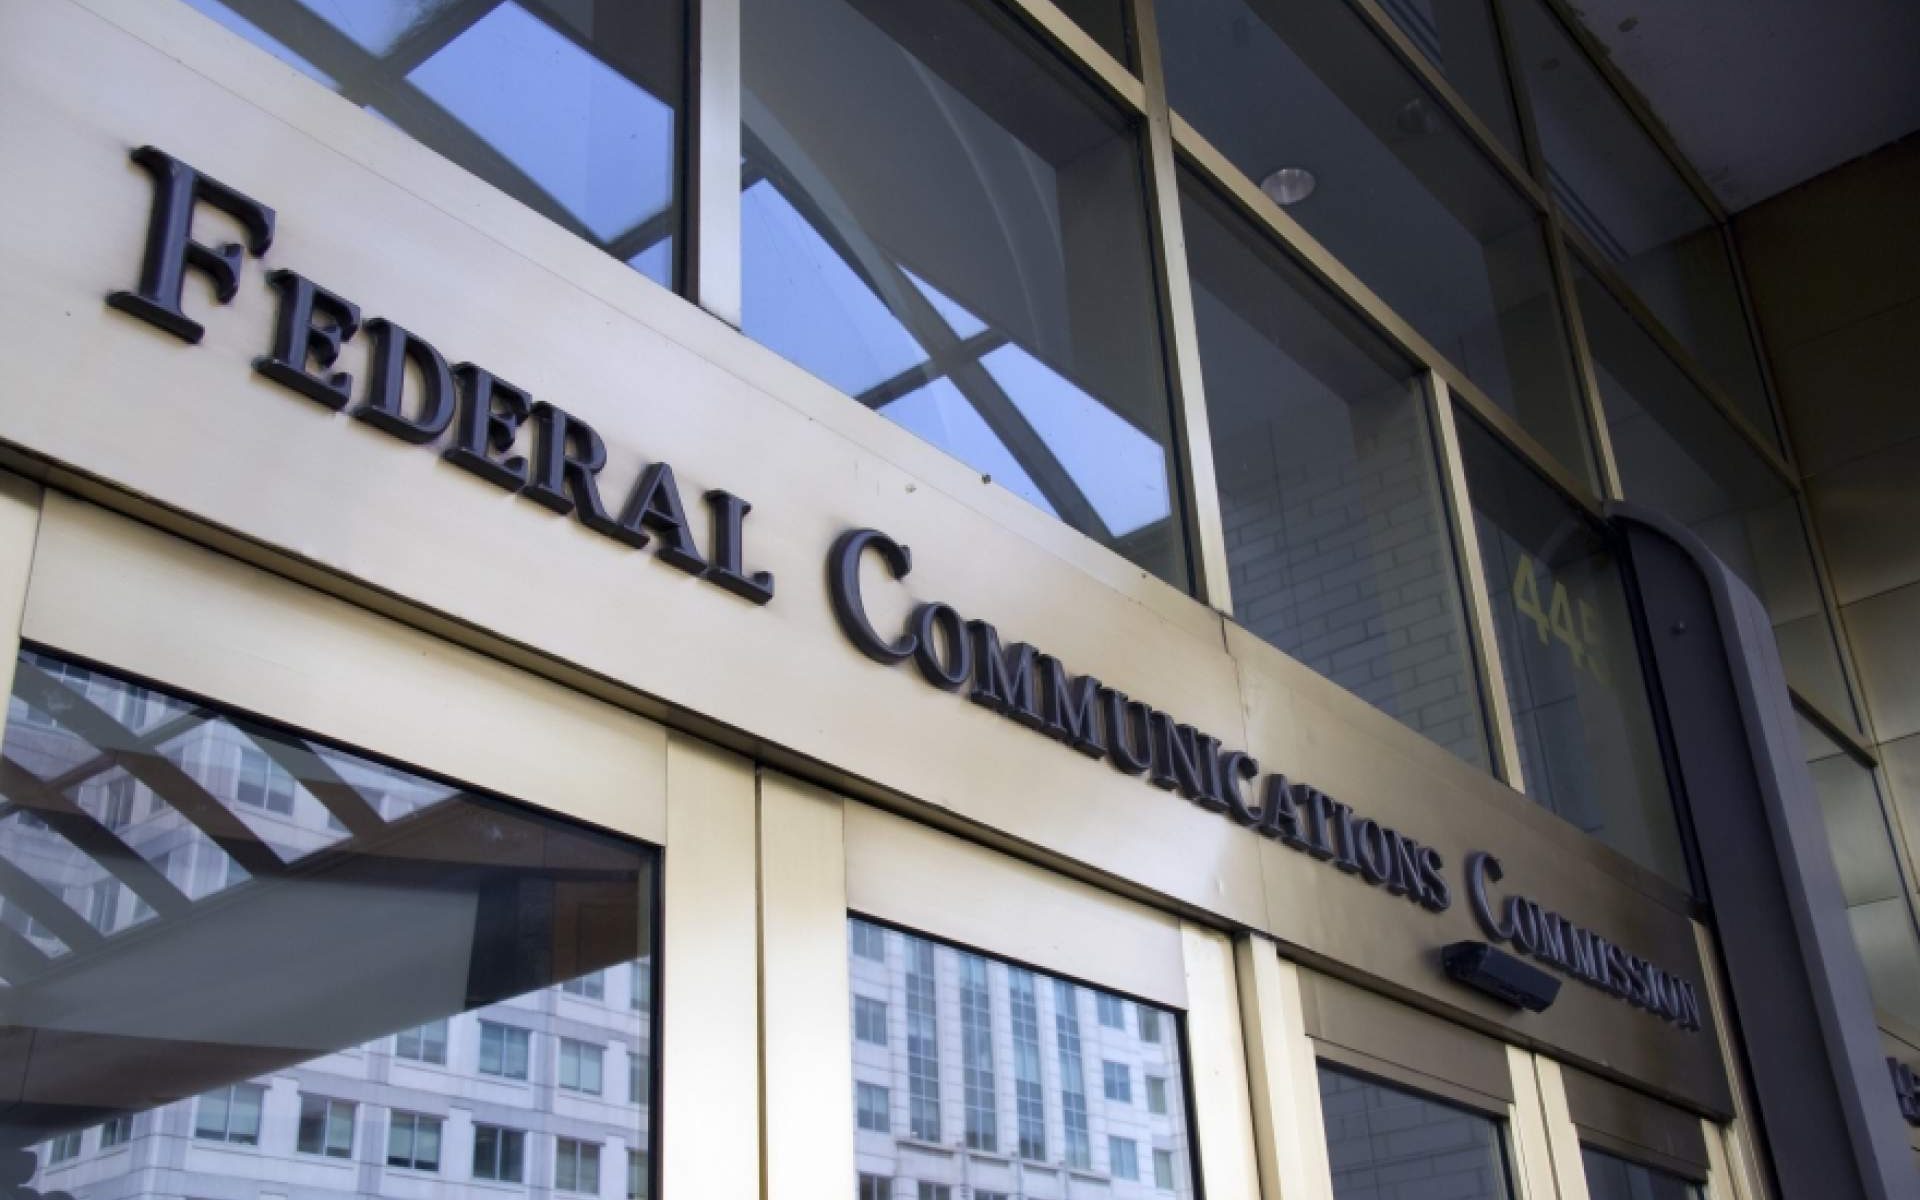 Federal Communications Commission Building tax regulatory solutions